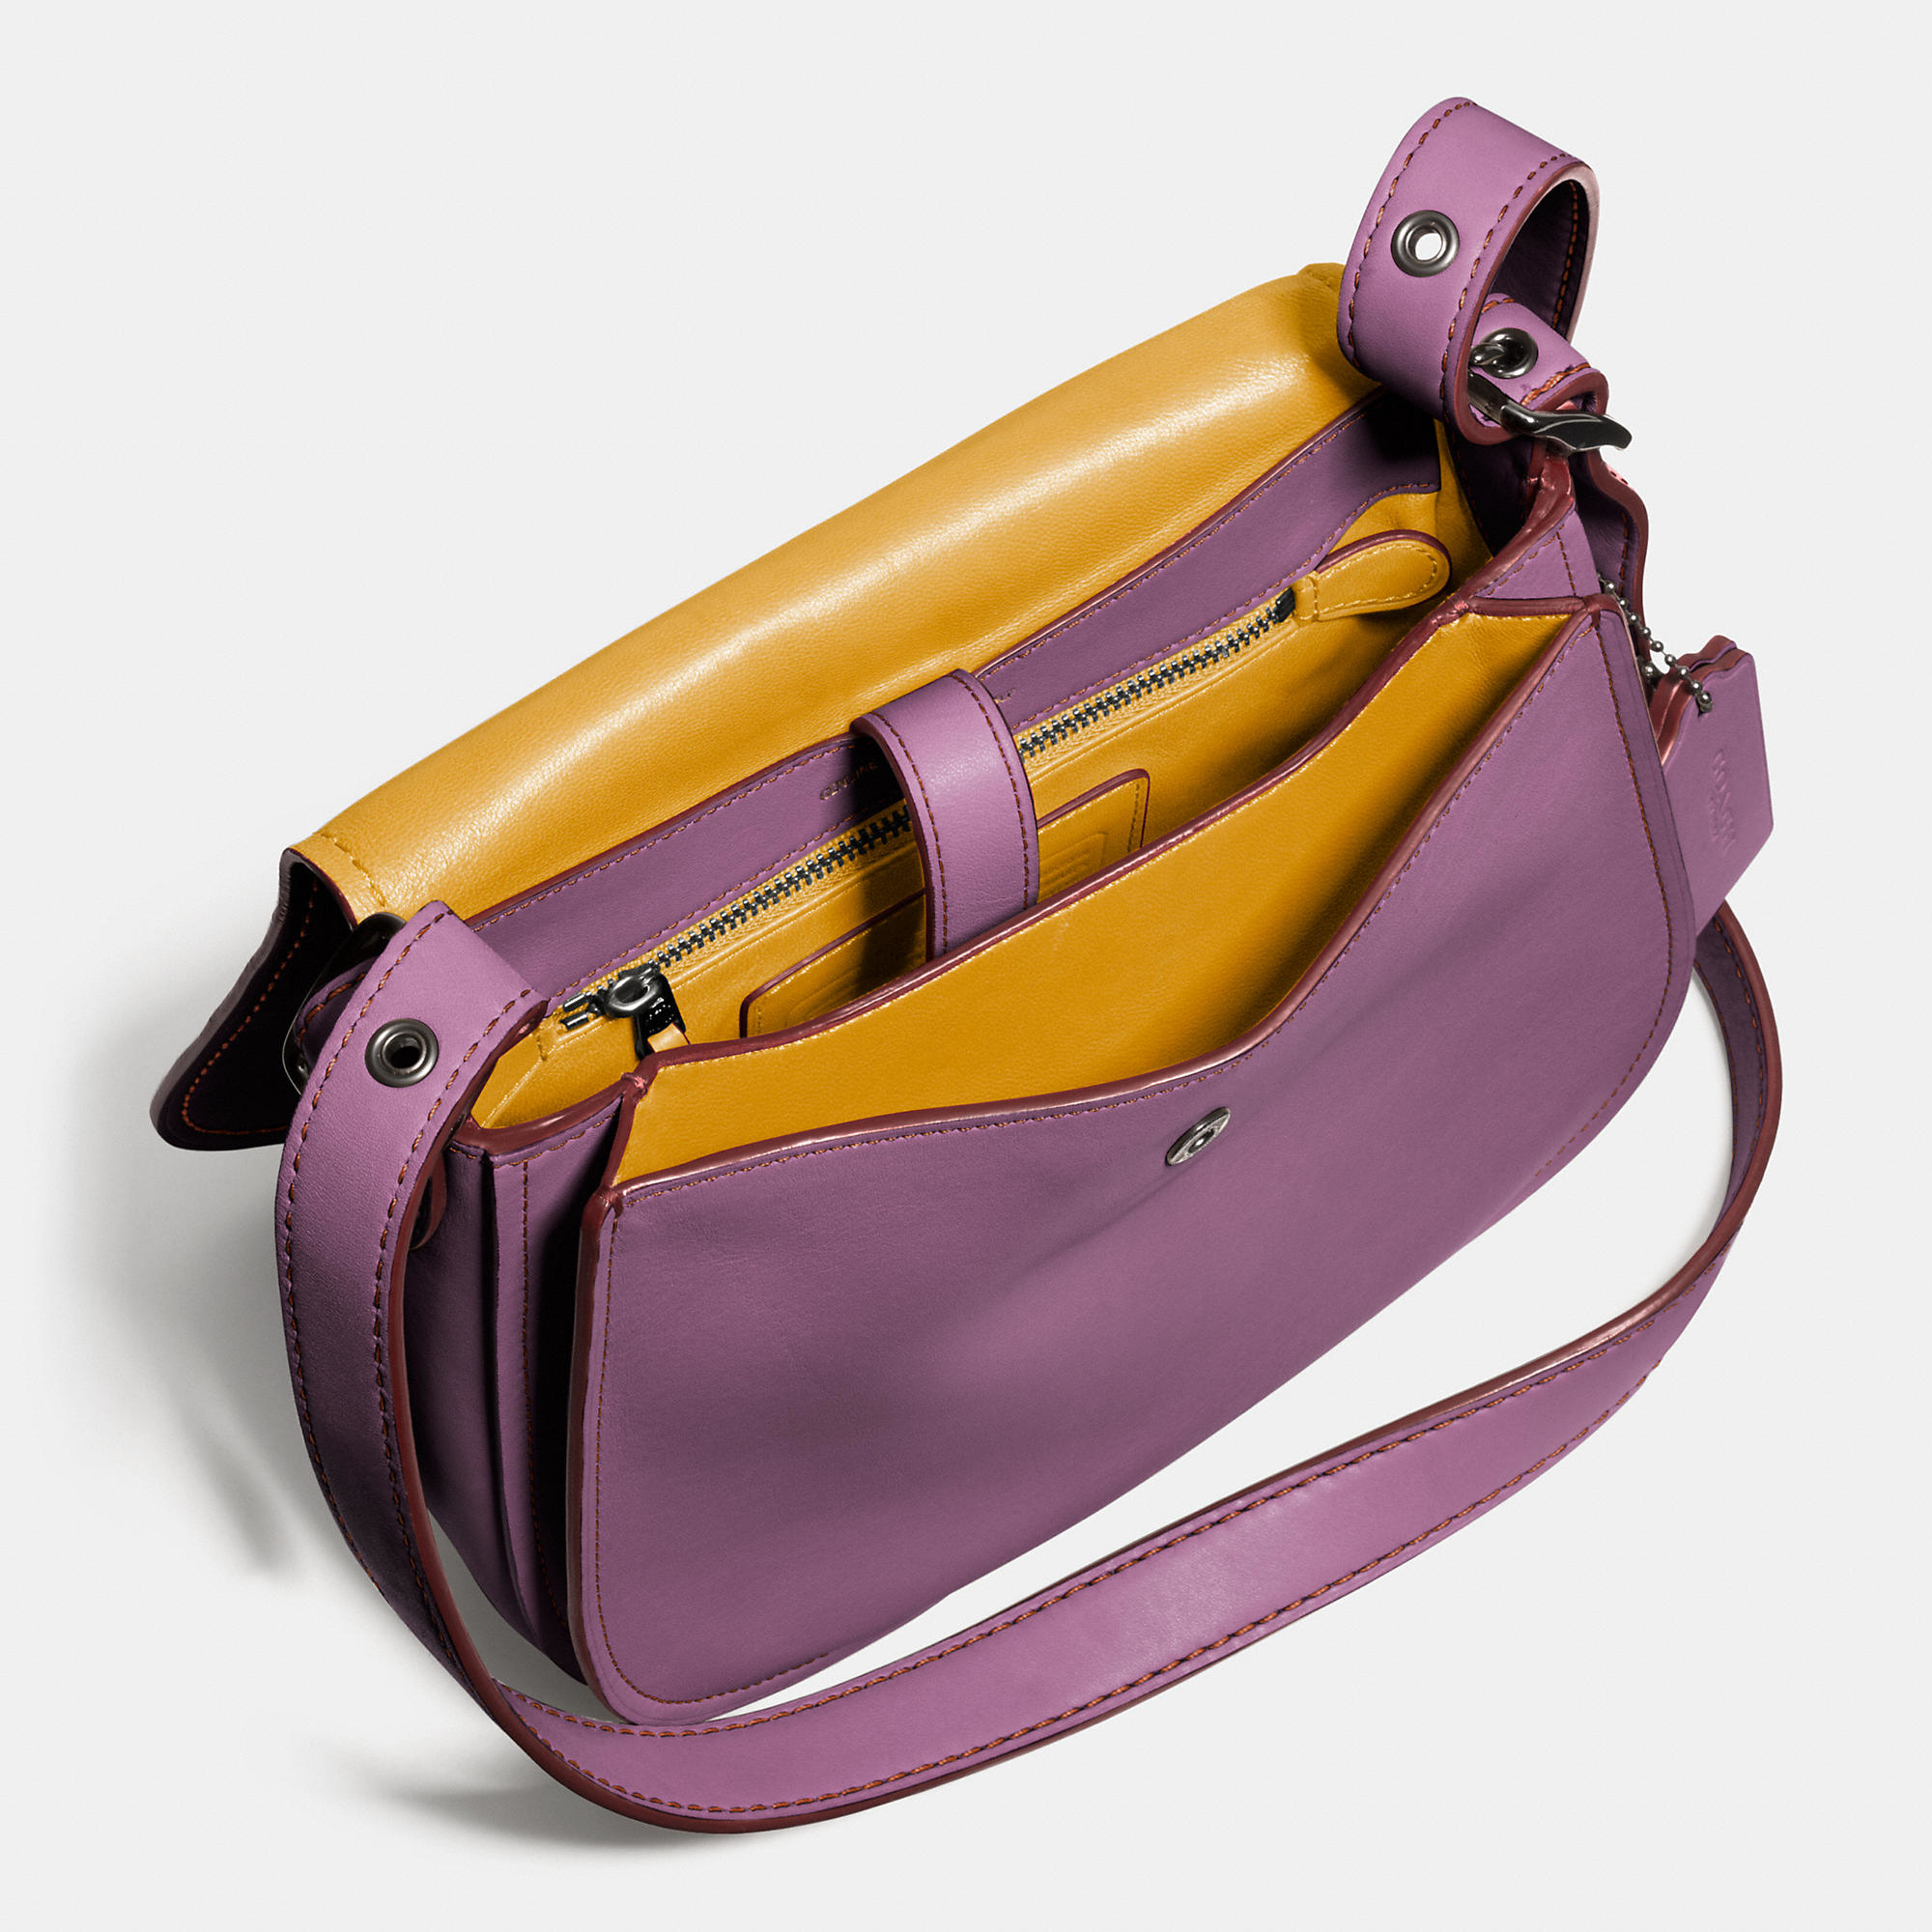 COACH Saddle Bag 23 In Glovetanned Leather in Purple - Lyst